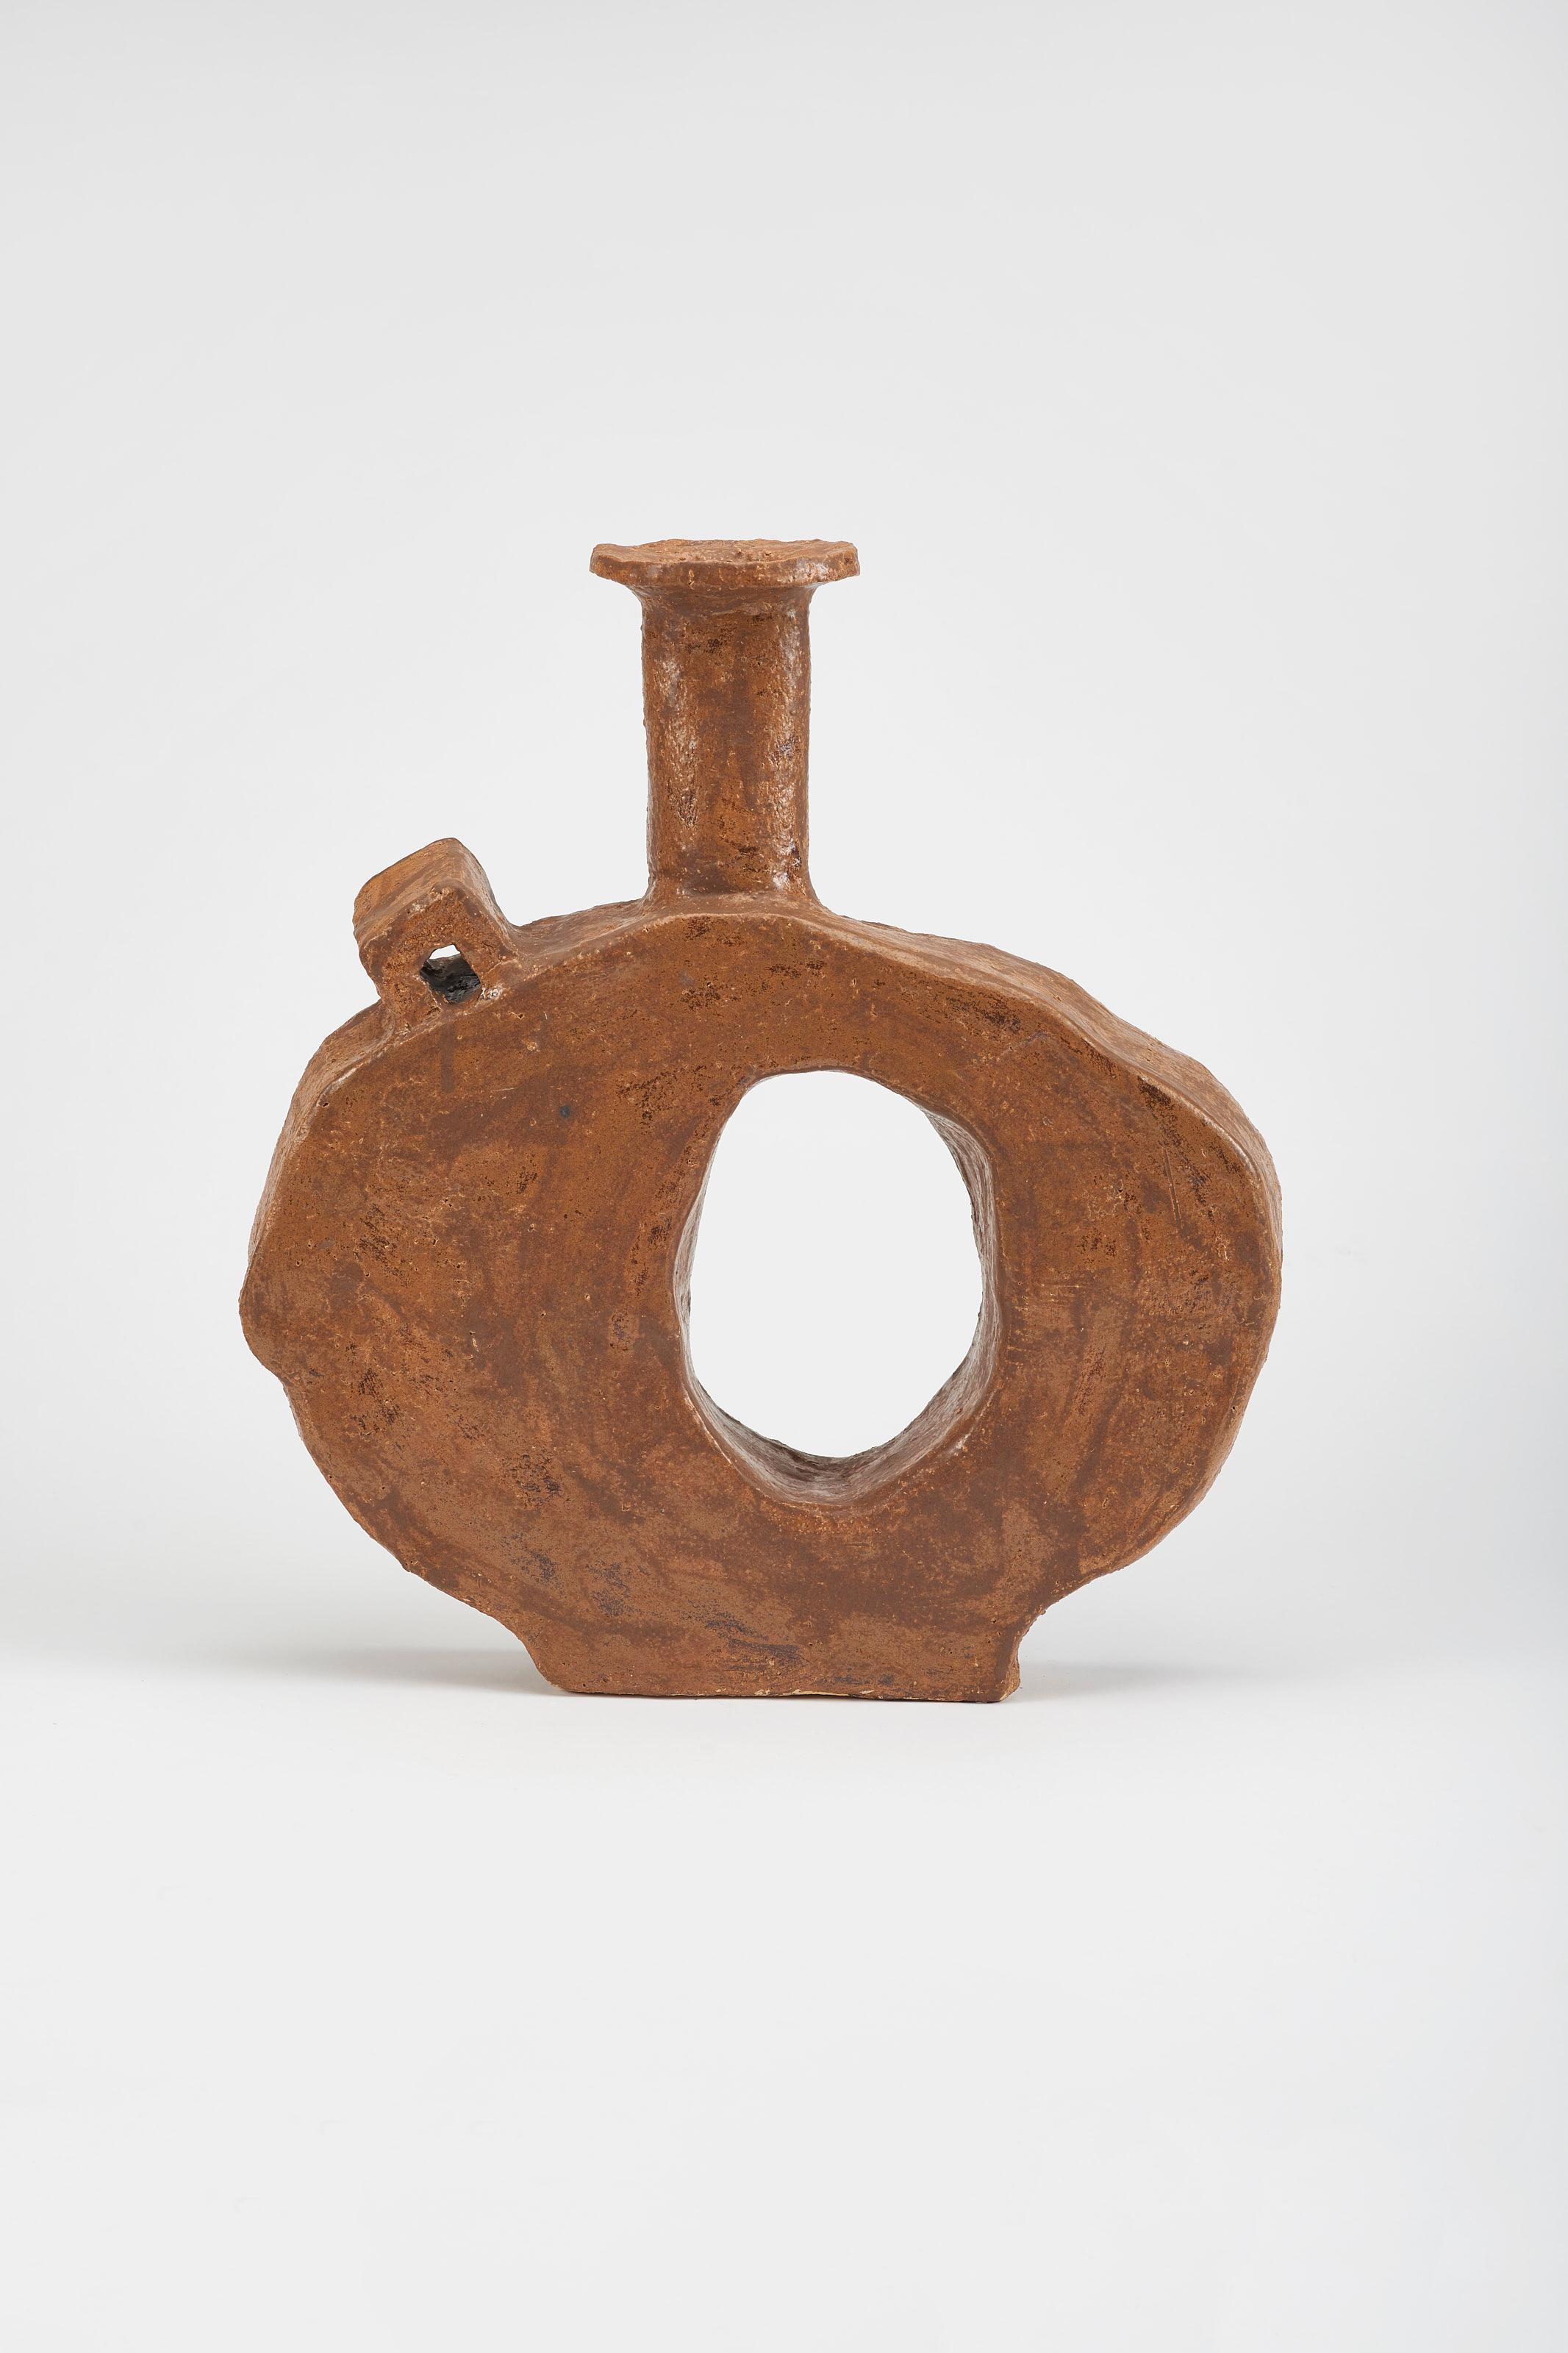 Tuja Big Vase by Willem Van Hooff.
Dimensions: W 48 x D 10 x H 50 cm (Dimensions may vary as pieces are hand-made and might present slight variations in sizes)
Material: Glazed Ceramics.

Core is a serie of vessels. Inspired by prehistoric african